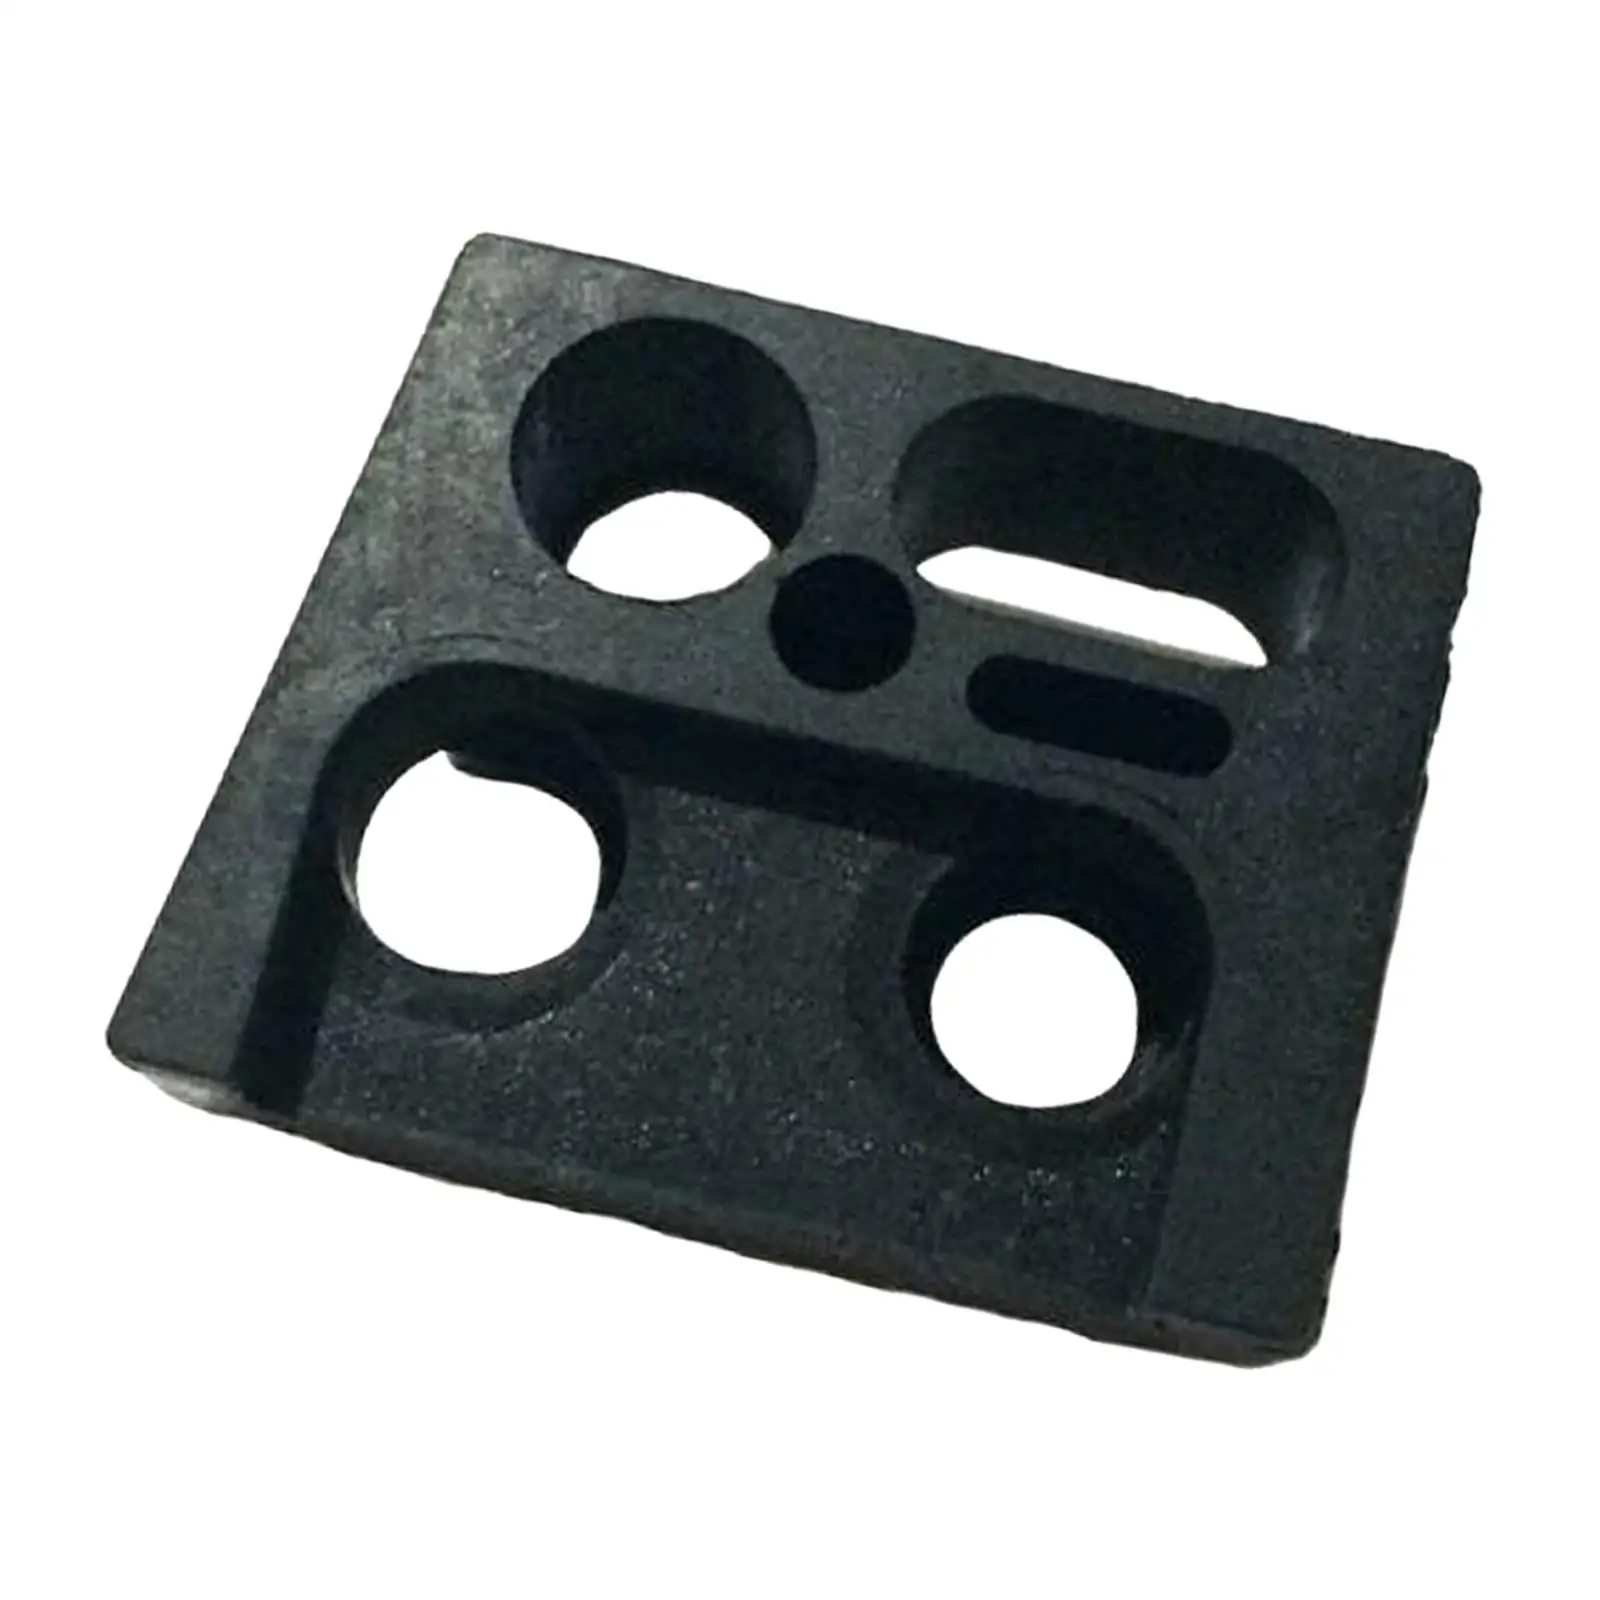 66T-42725-30-00 Repair Parts Replacement Rubber Grommet Easy Installation Accessories for Powertec Outboard Engine 40HP